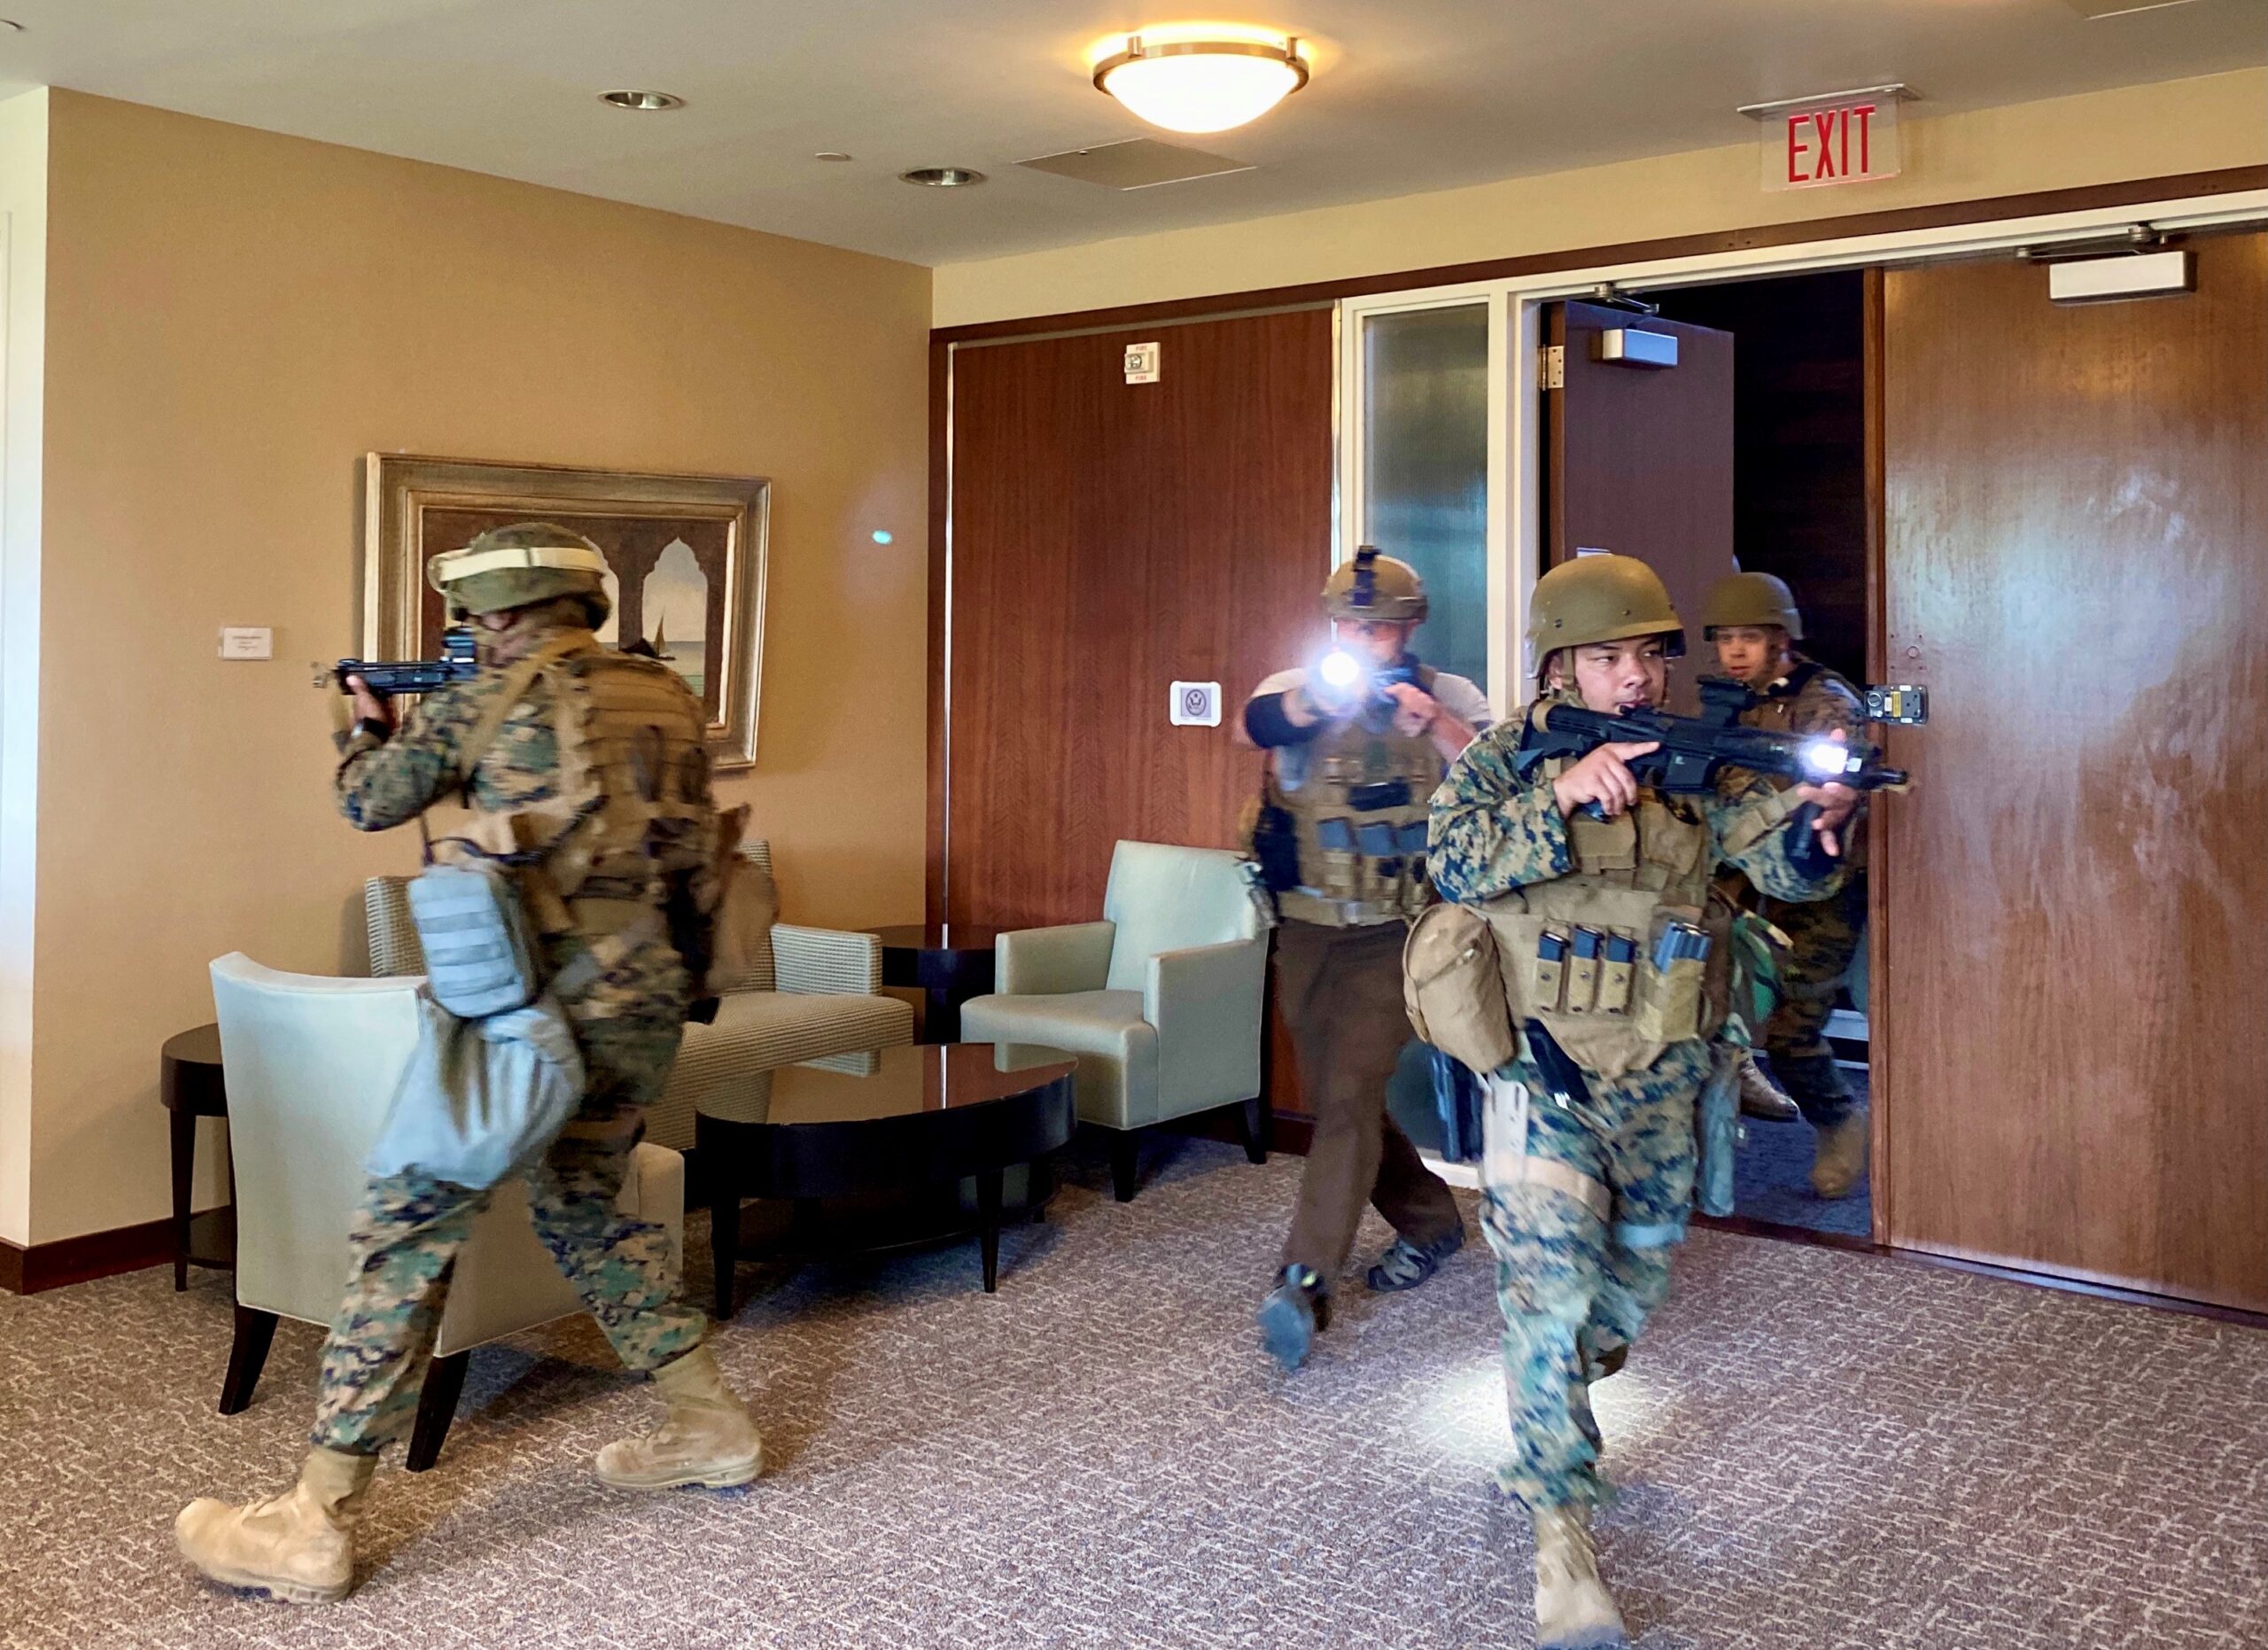 DSS special agents and Marine Security Guards enter the embassy's executive suite in search of an armed intruder during an exercise at the U.S. Embassy in Dar es Salaam, Tanzania on July 6, 2021. (U.S. Department of State photo).